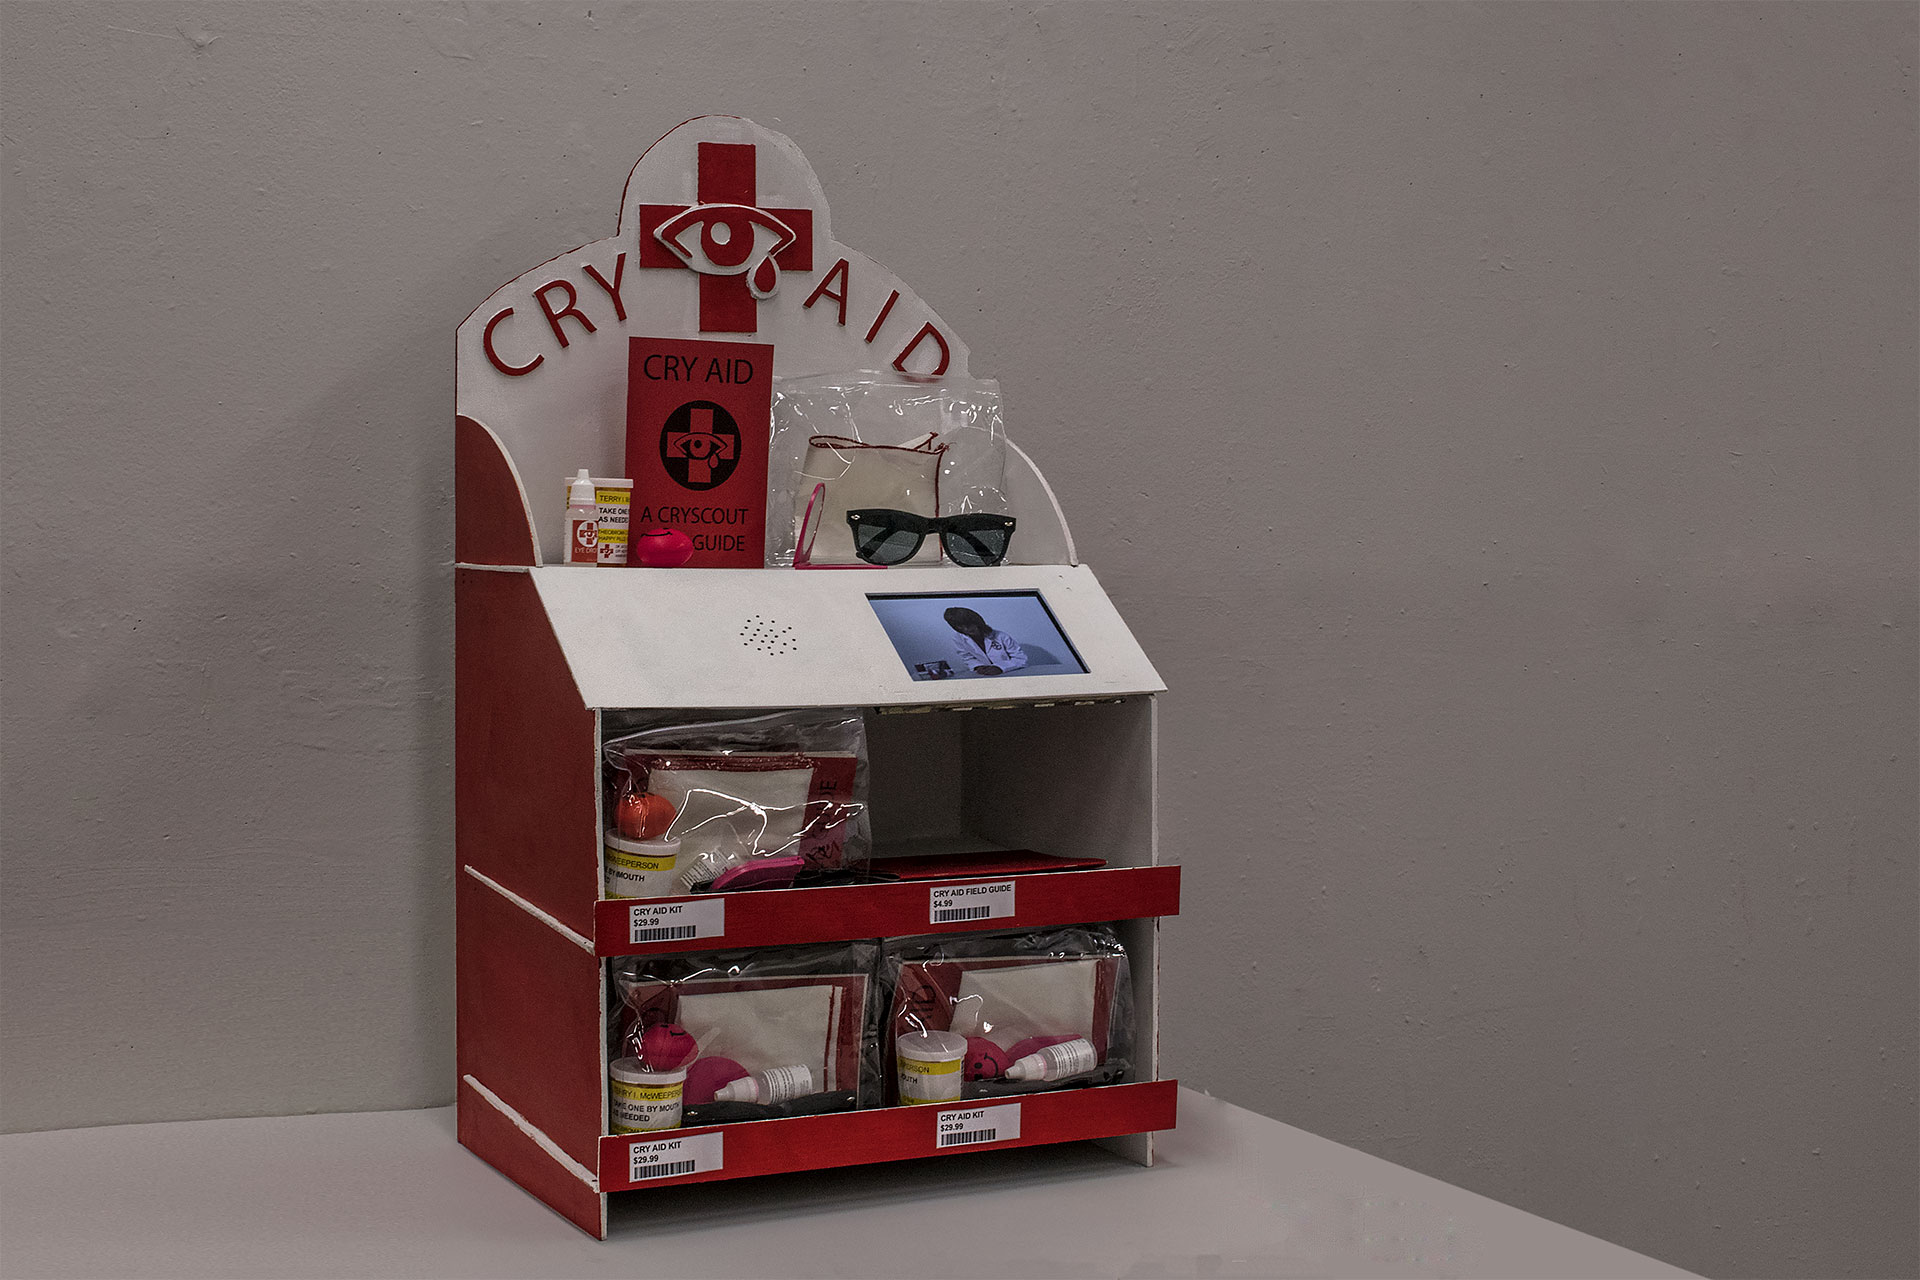   Cry Aid Display    8 min looping infomercial, Cry Aid Kits, Cry Aid Field Guides, wooden display, price tags  32" x 19" x 13"  2017. 